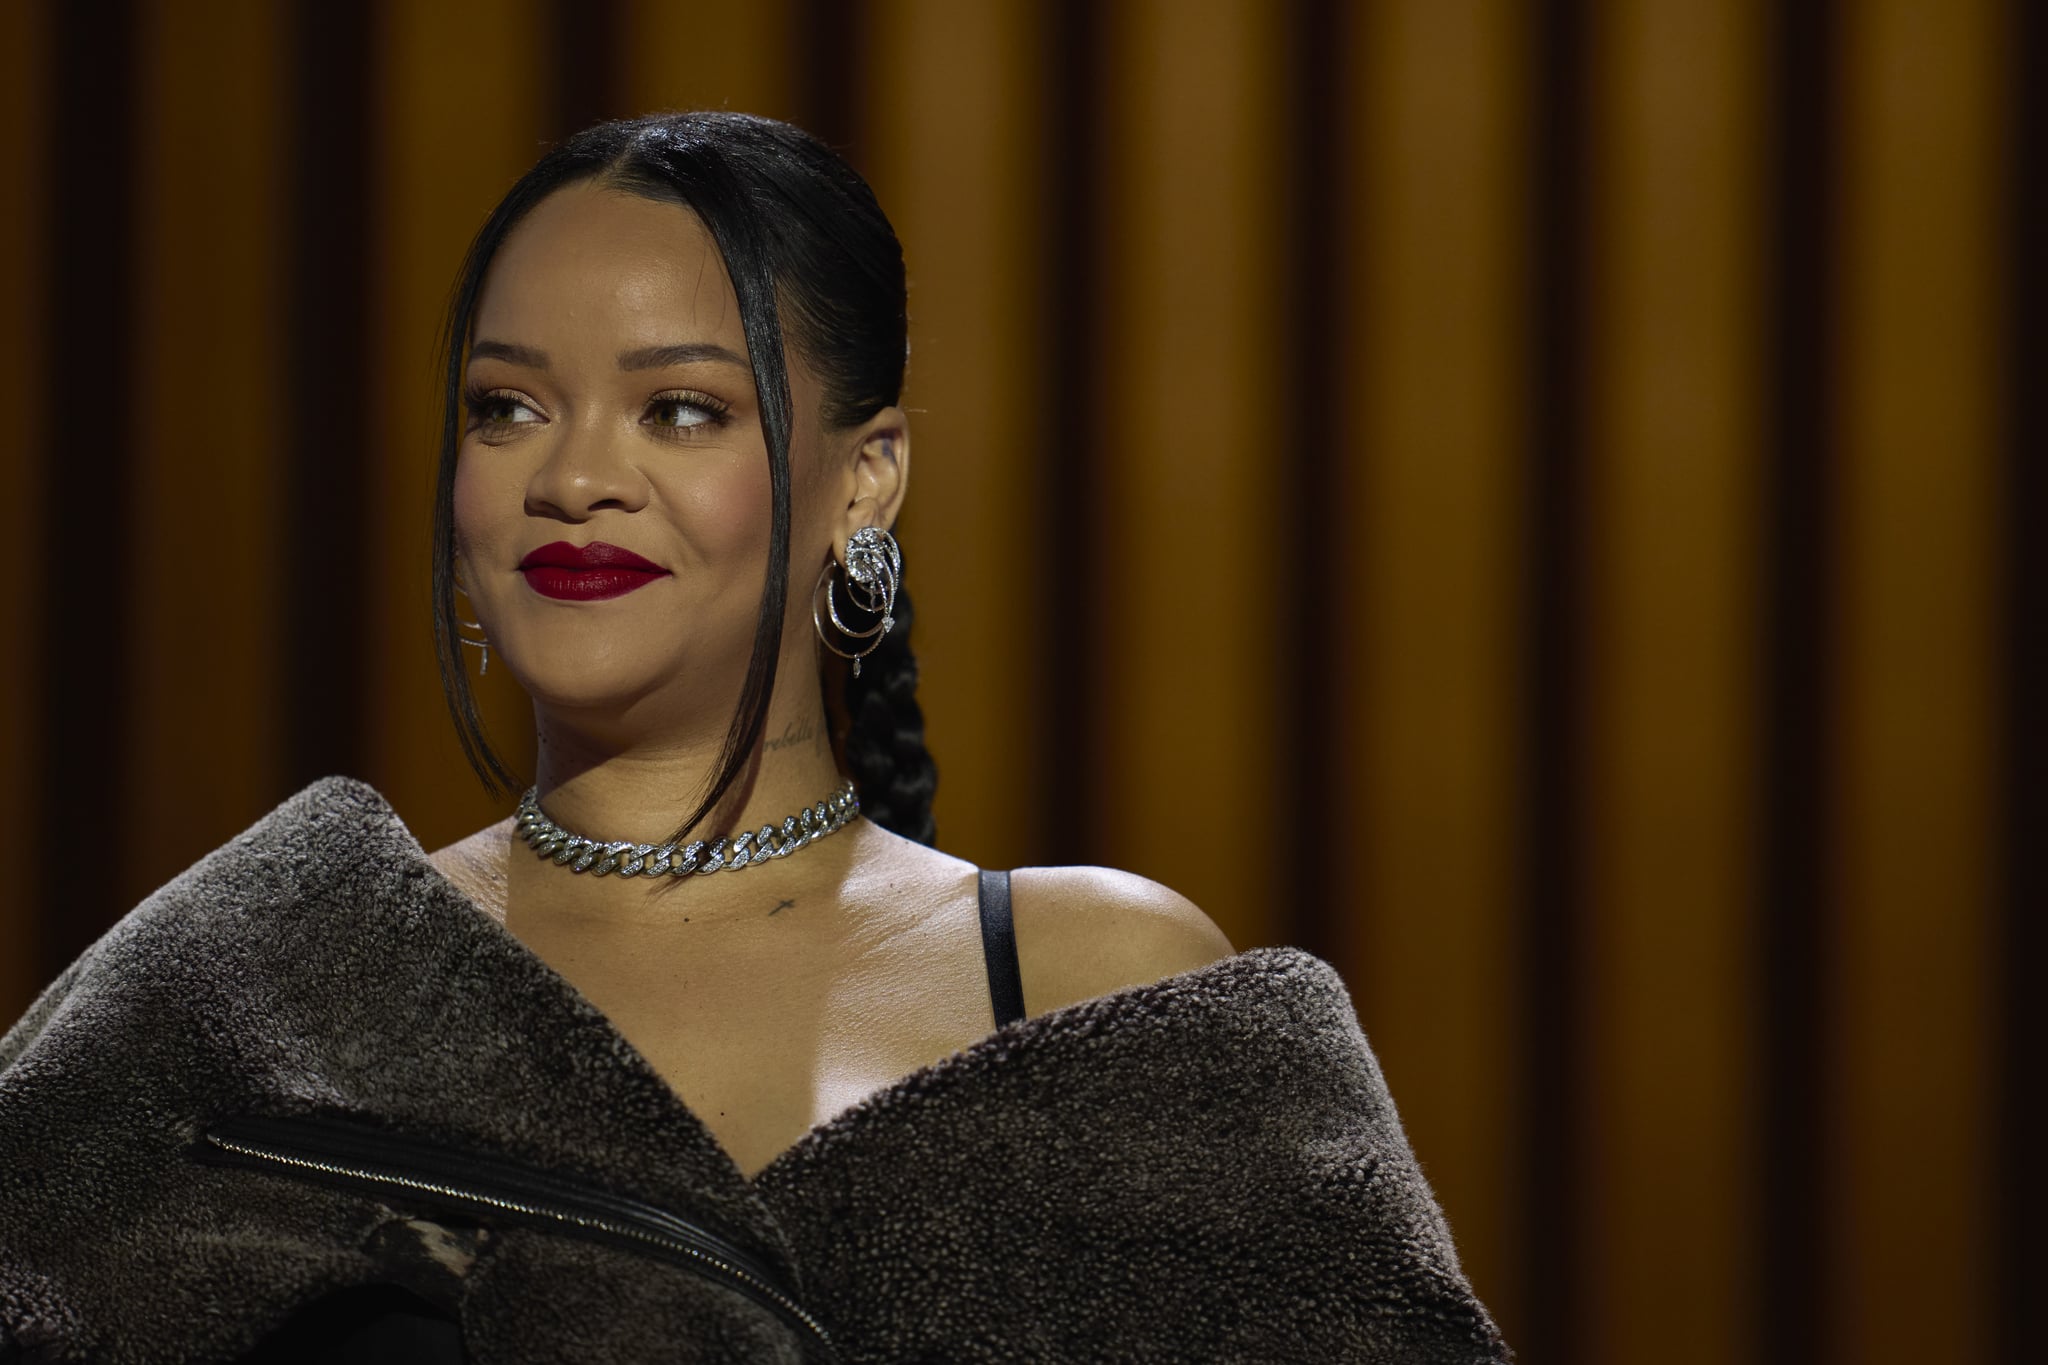 PHOENIX, AZ - FEBRUARY 09: Rihanna speaks during a press conference for the Apple Music Super Bowl 57 halftime show at the Phoenix Convention Centre on February 9, 2023 in Phoenix, Arizona. (Photo by Cooper Neill/Getty Images)